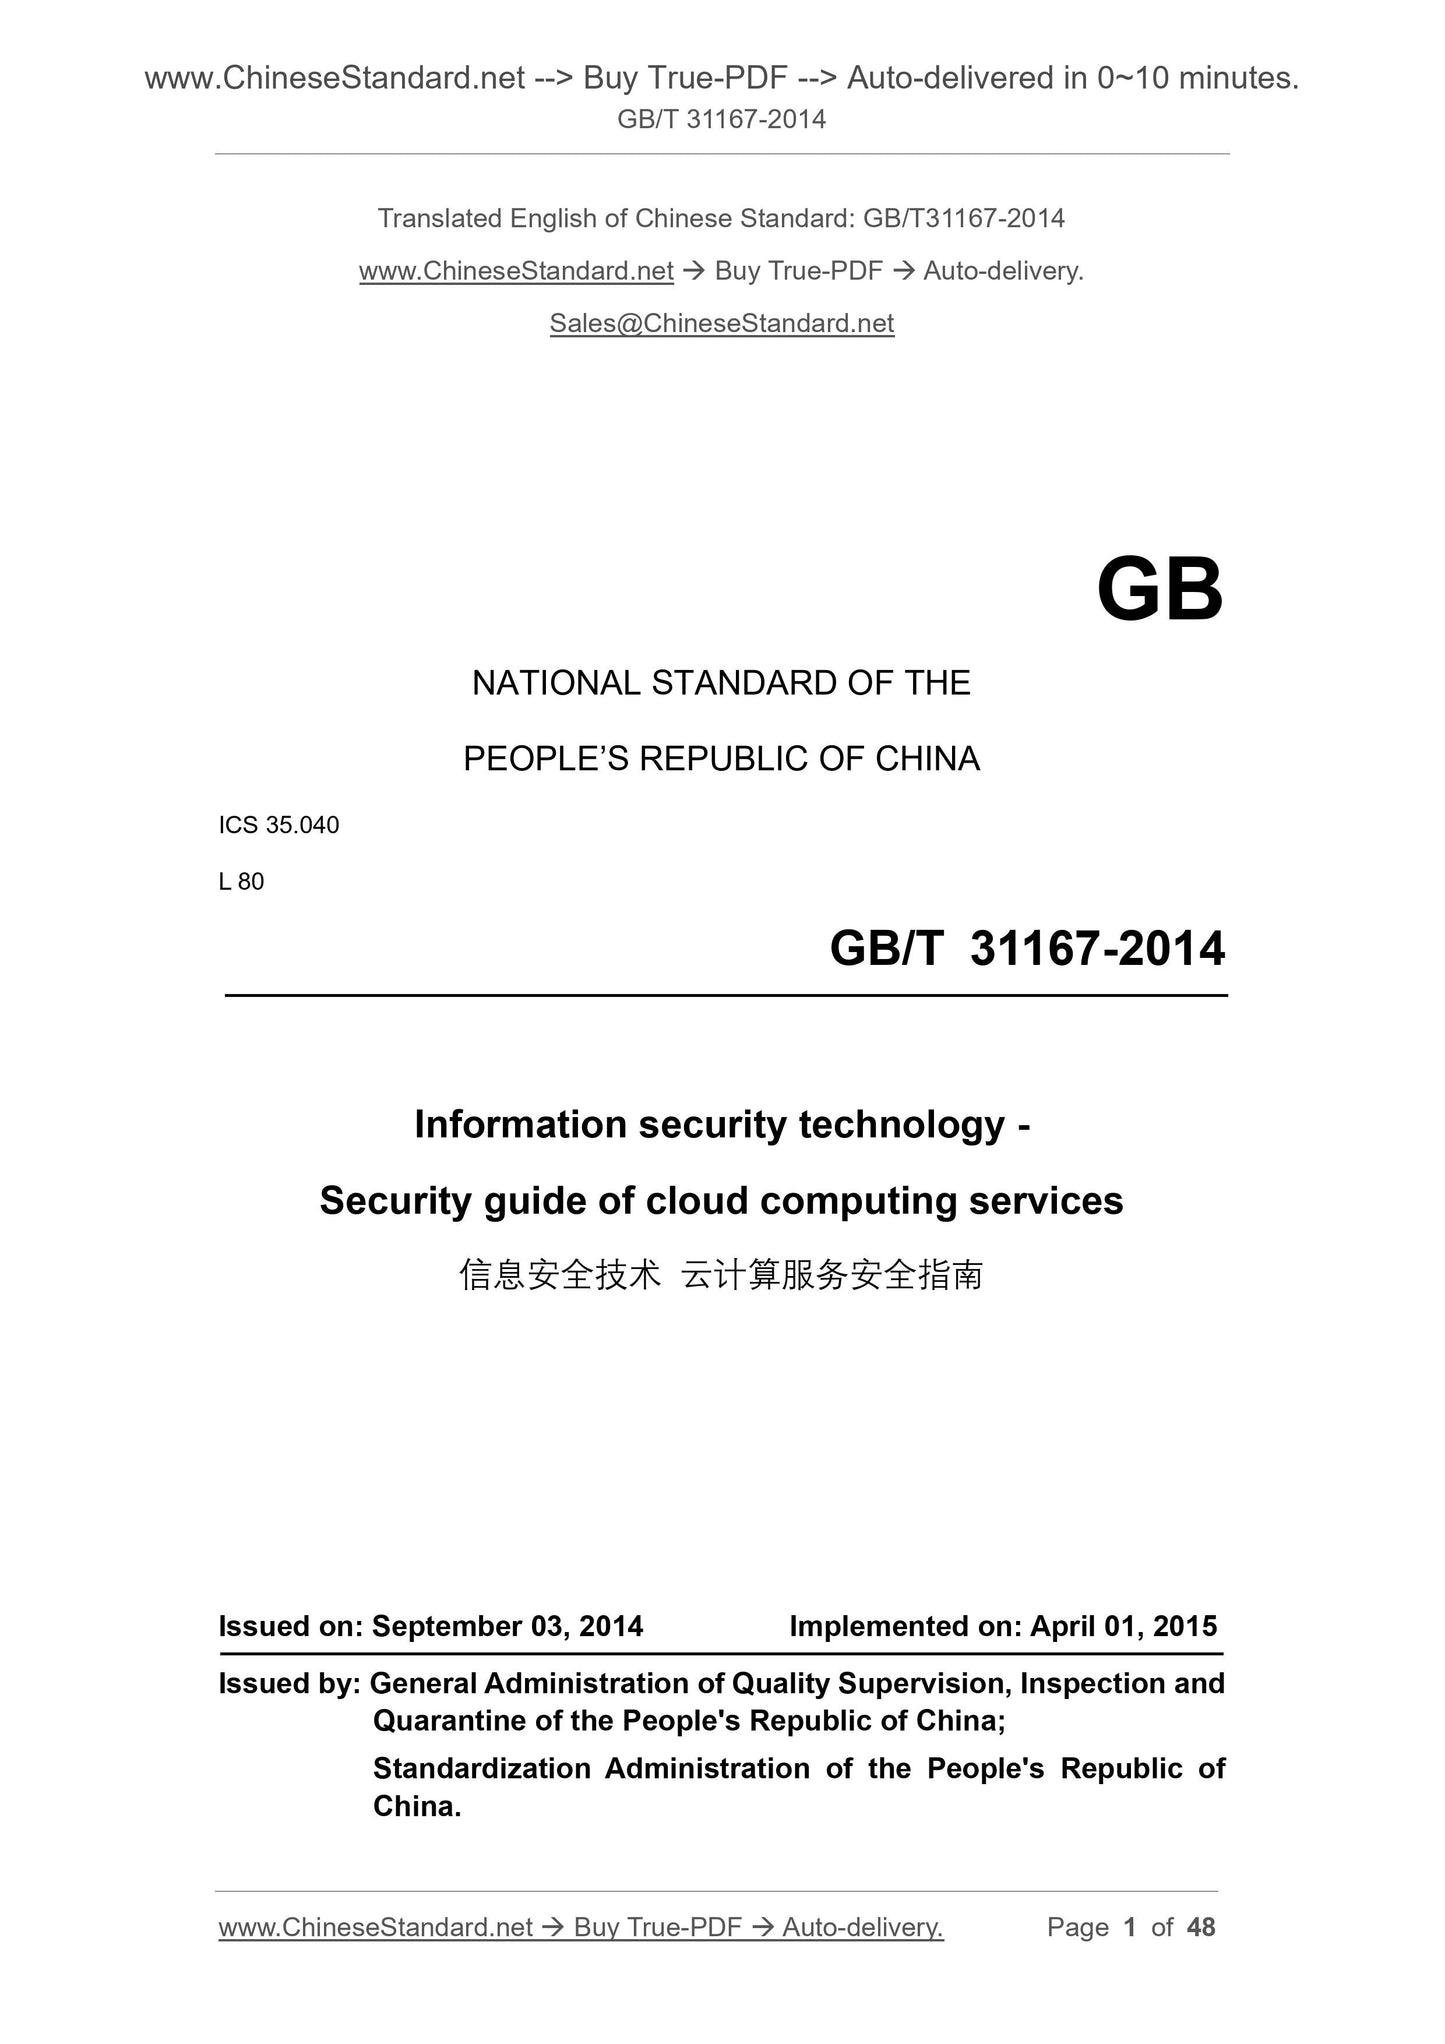 GB/T 31167-2014 Page 1